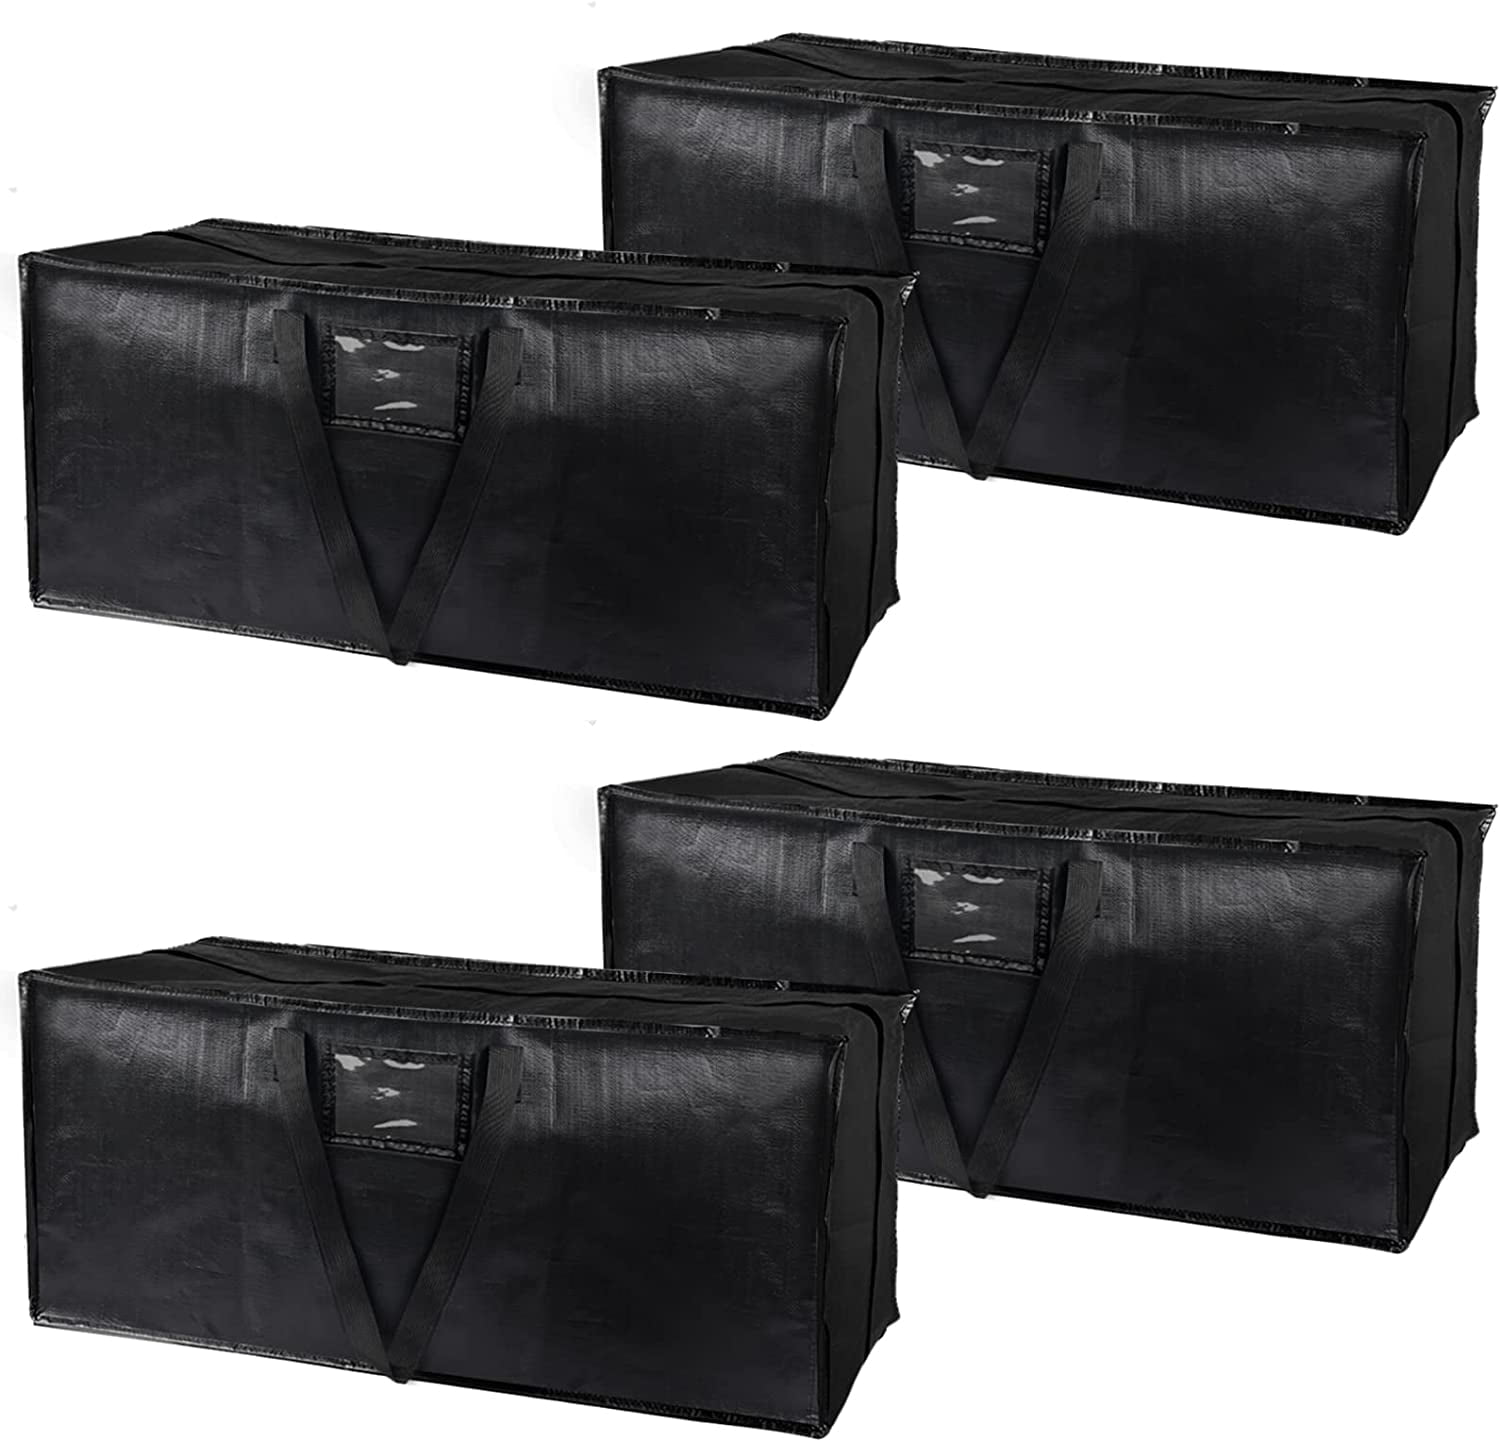 Rihim Moving Bags 90L - 4 Black Heavy Duty Extra Large Storage Bags for  Clothes - Packing Bags with Backpack Straps Strong Handles Zippers -  College